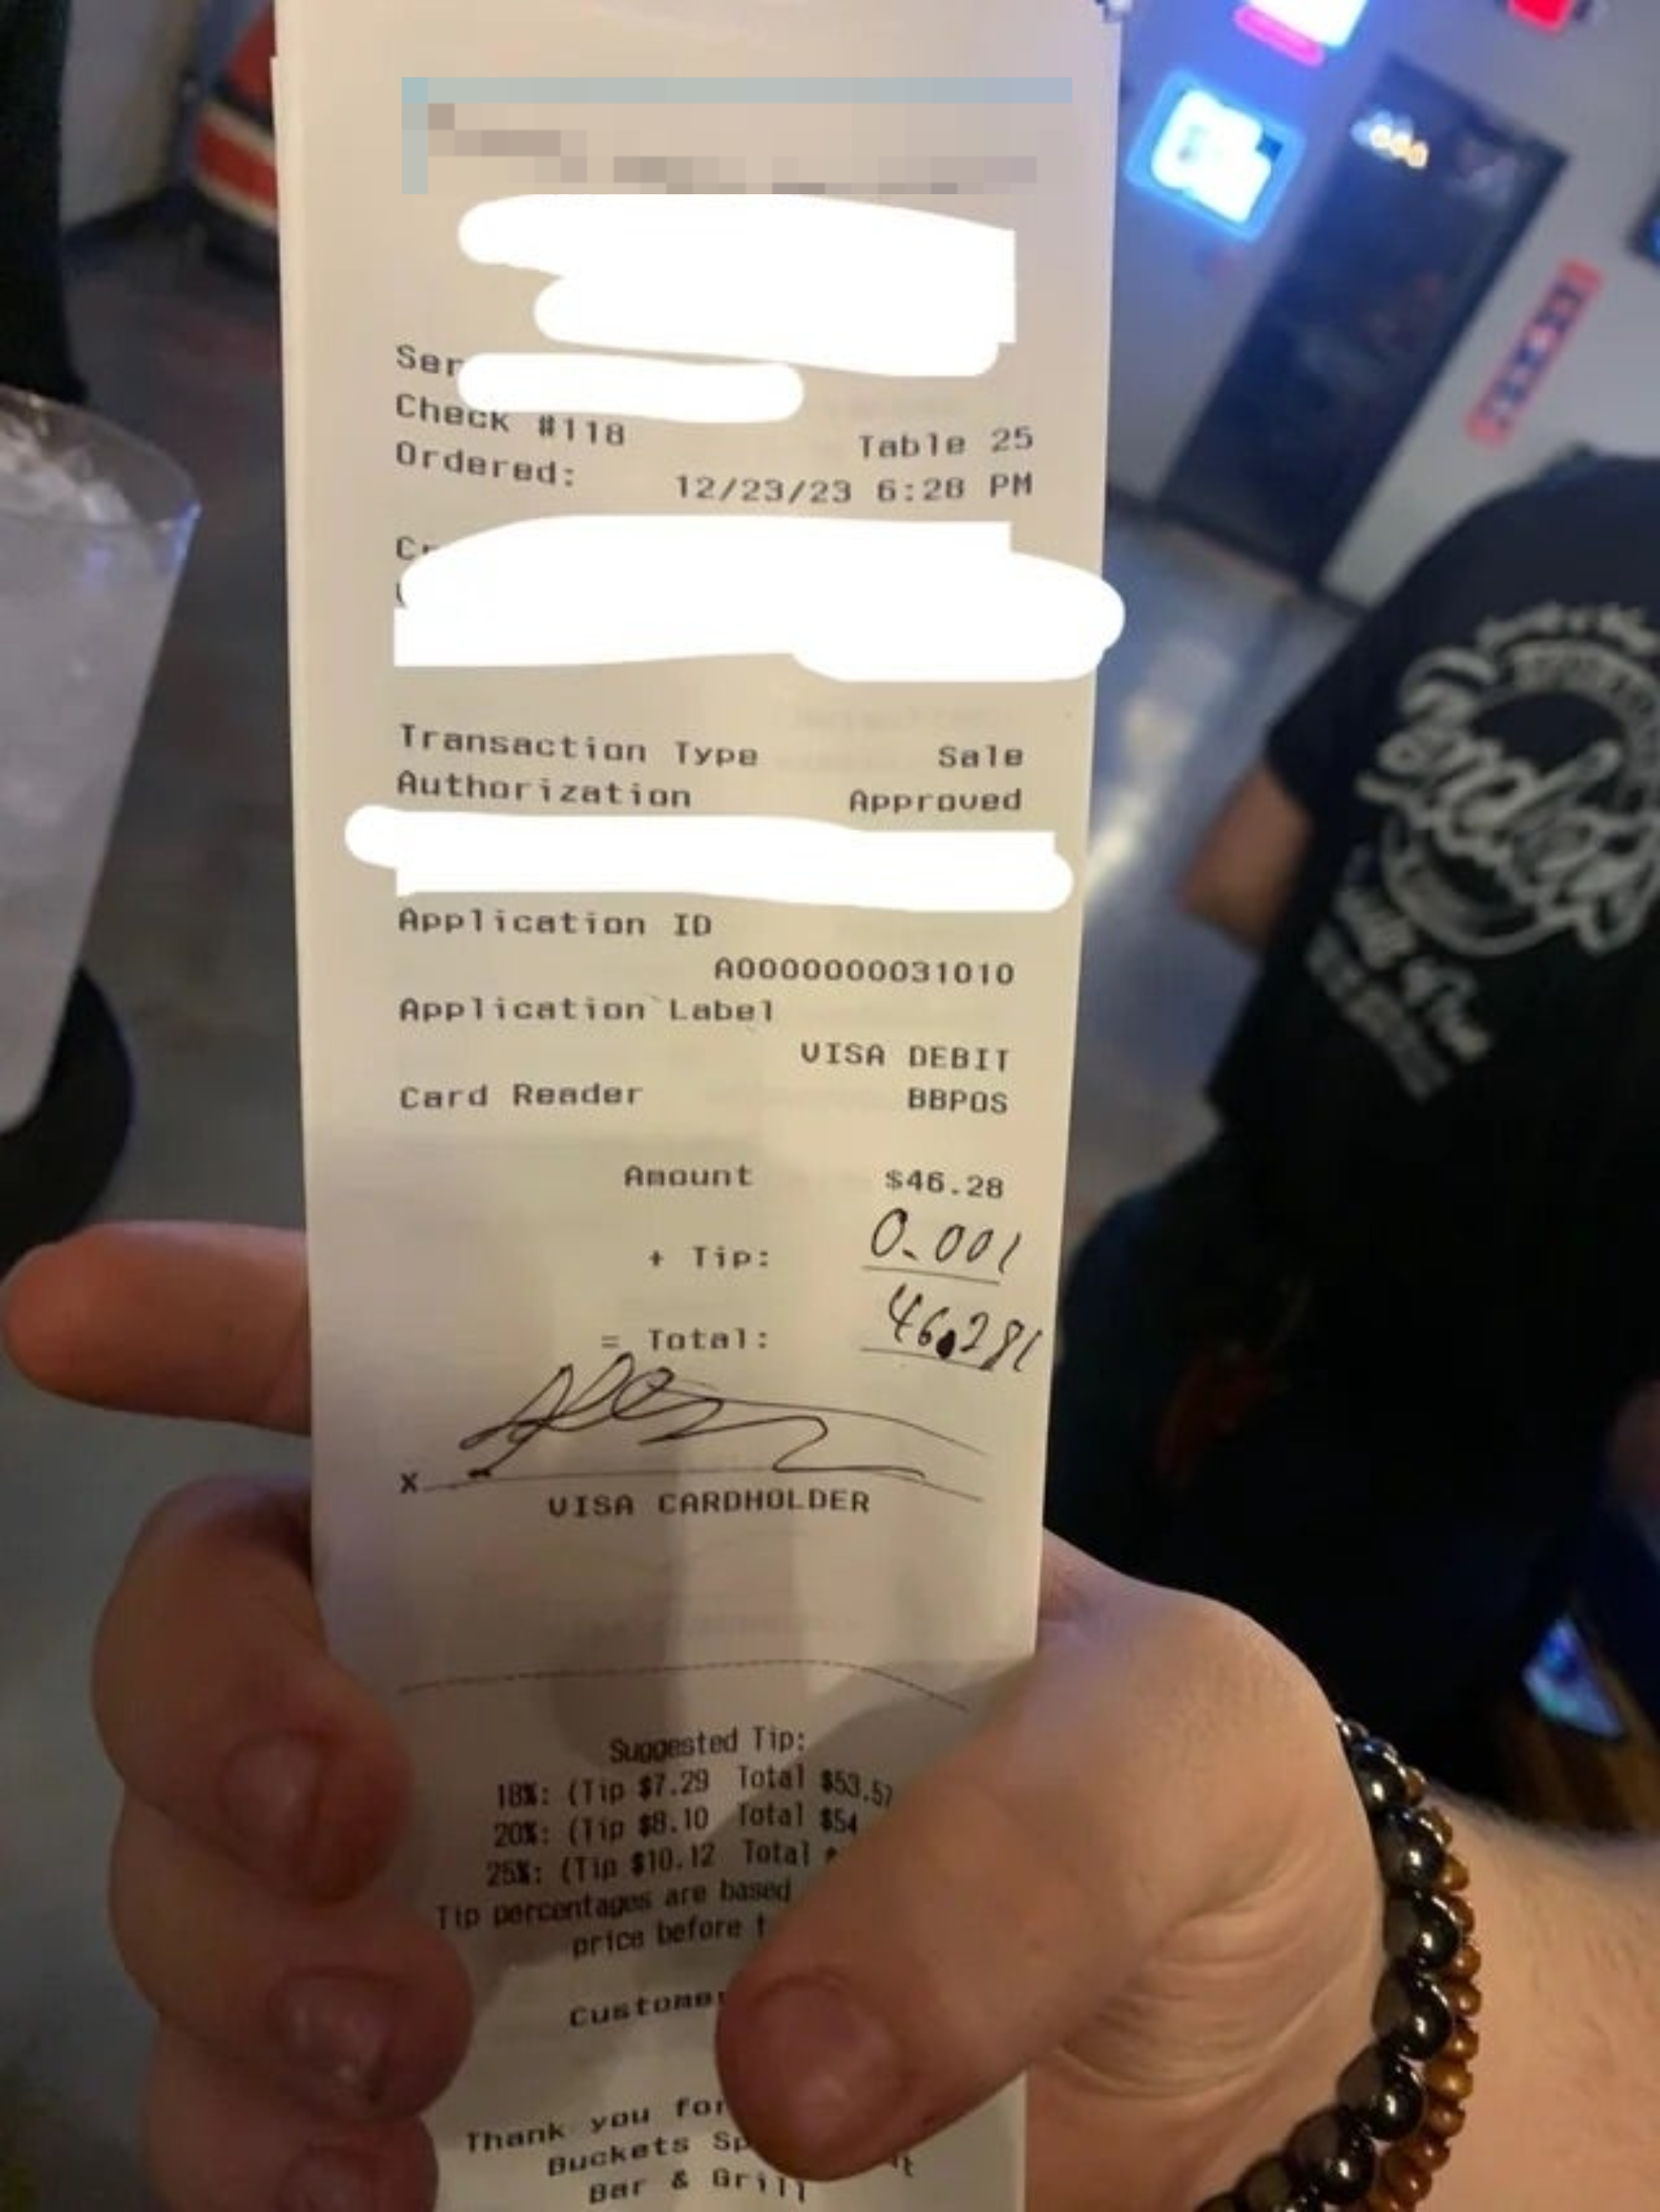 Receipt showing a total of $46.281 with a $0.001 tip